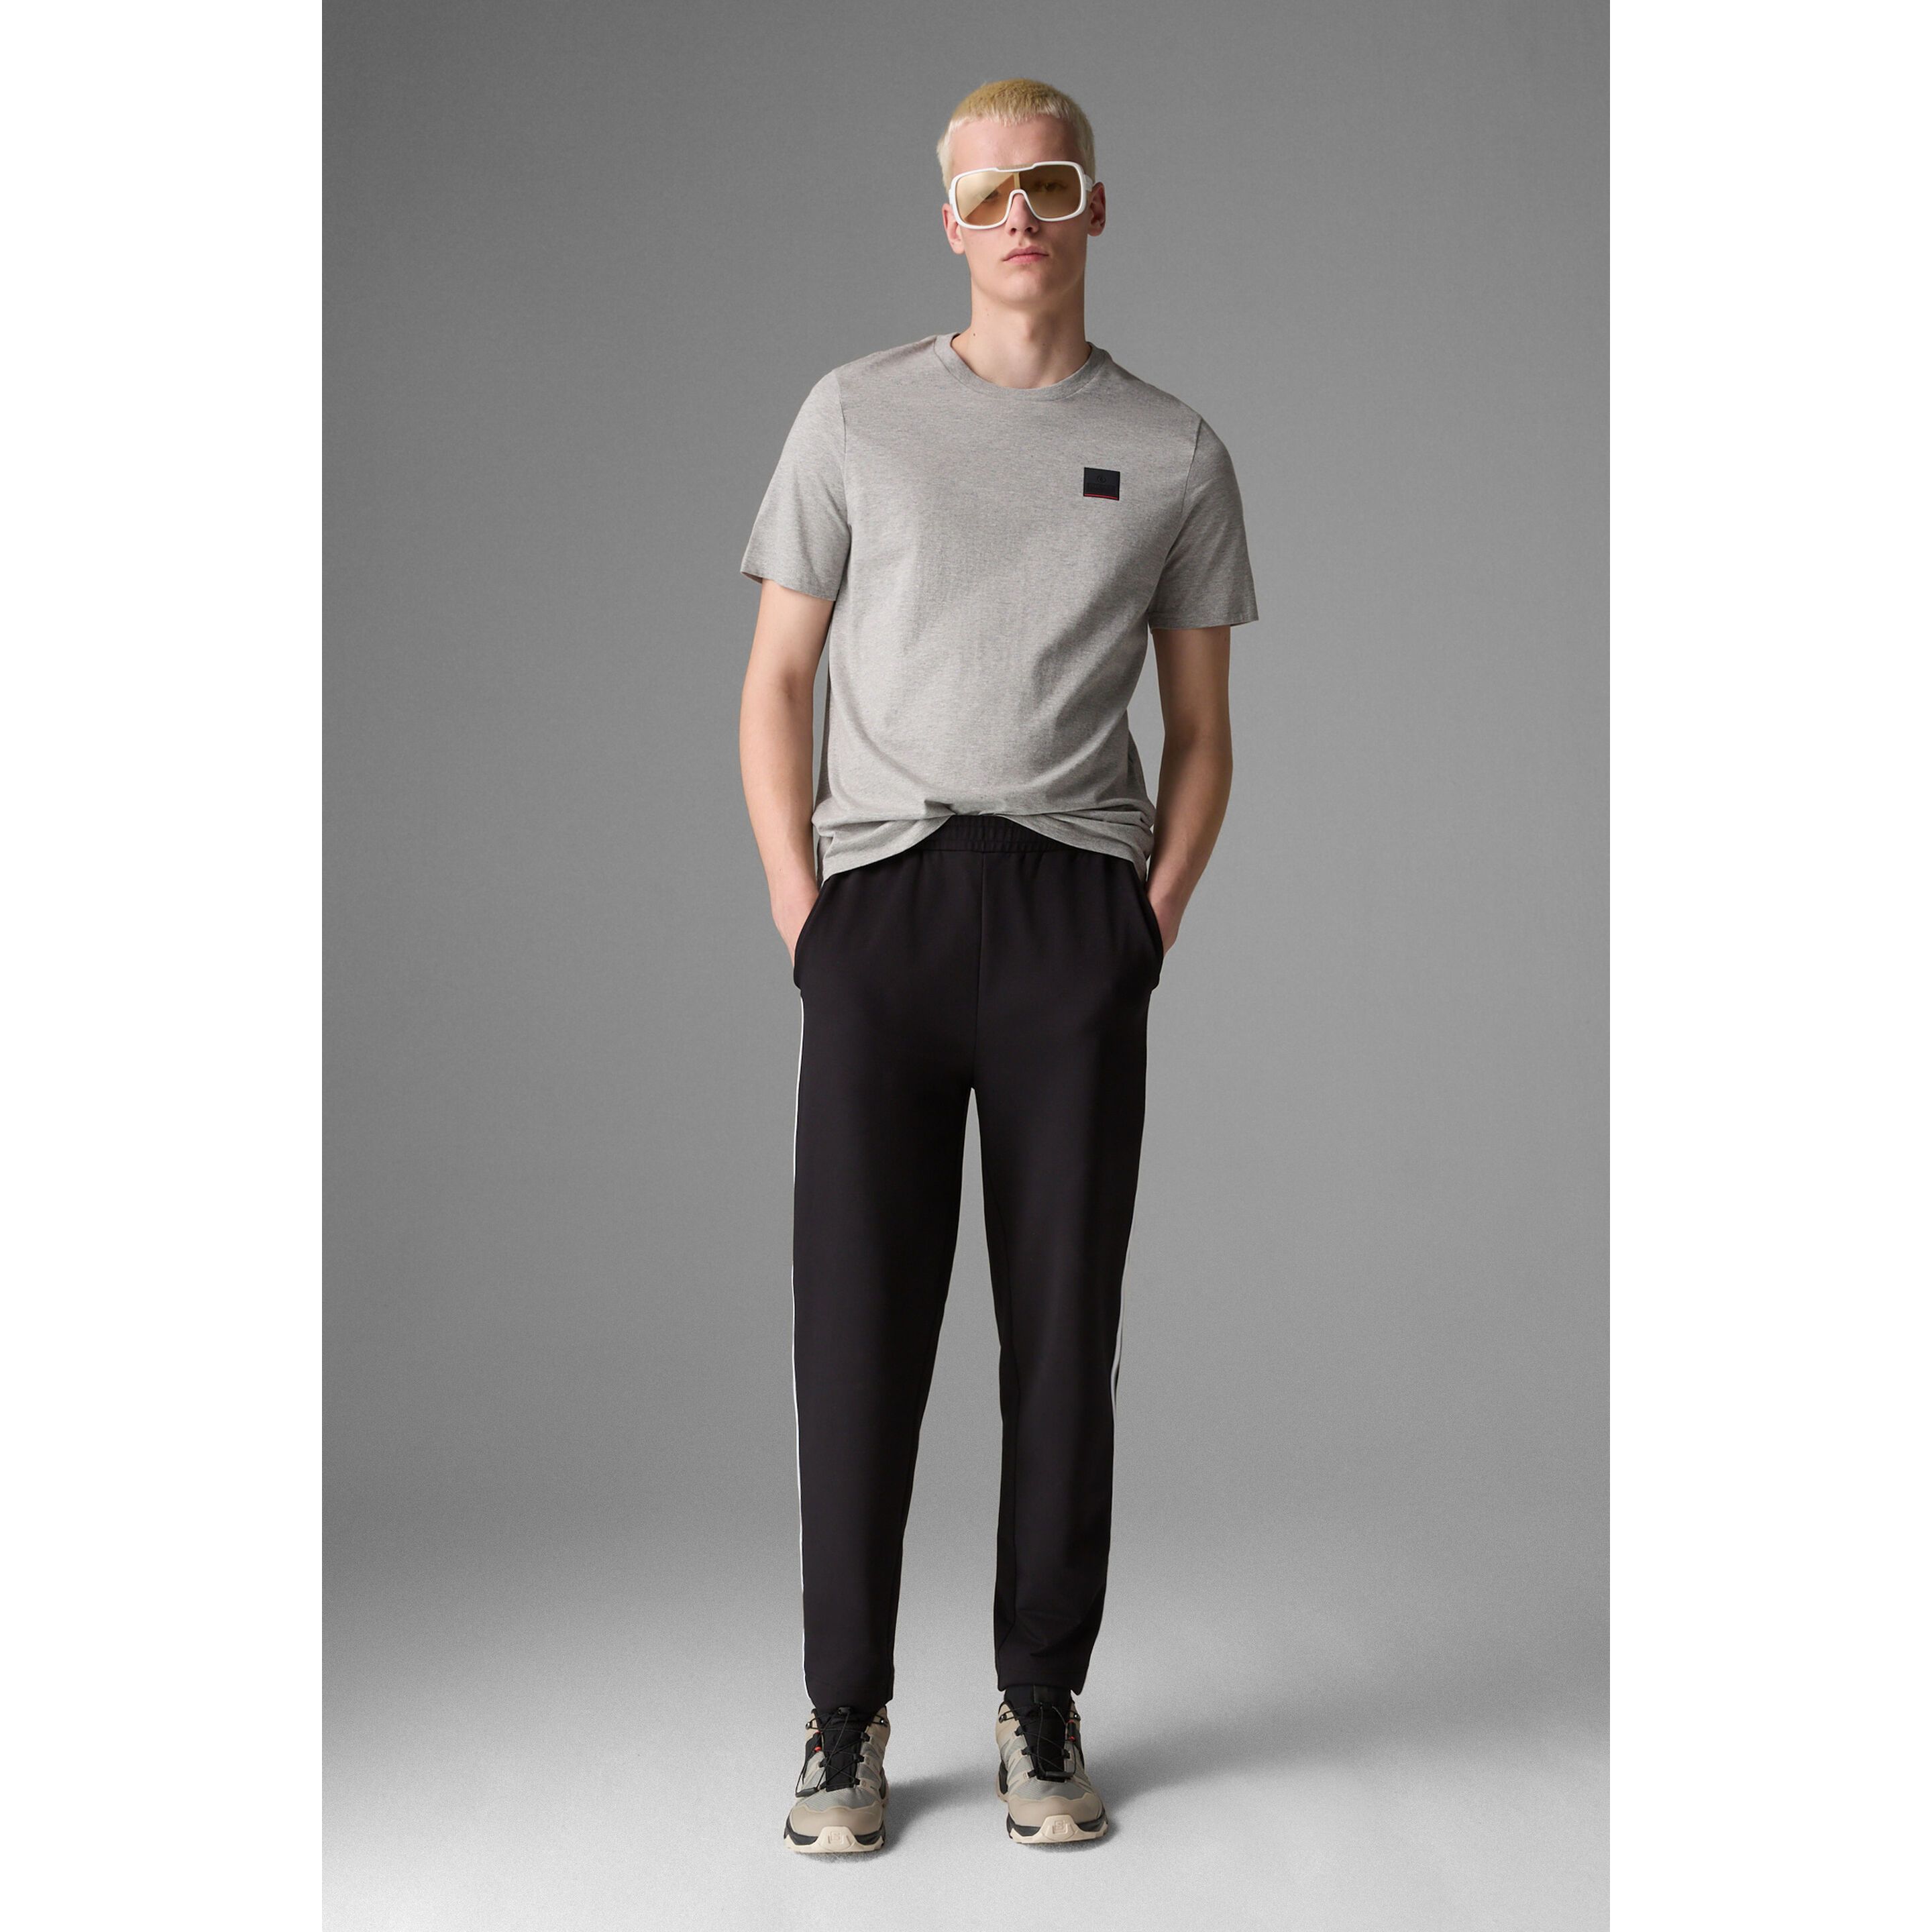 Joggers & Sweatpants -  bogner fire and ice Pedro Tracksuit Trousers